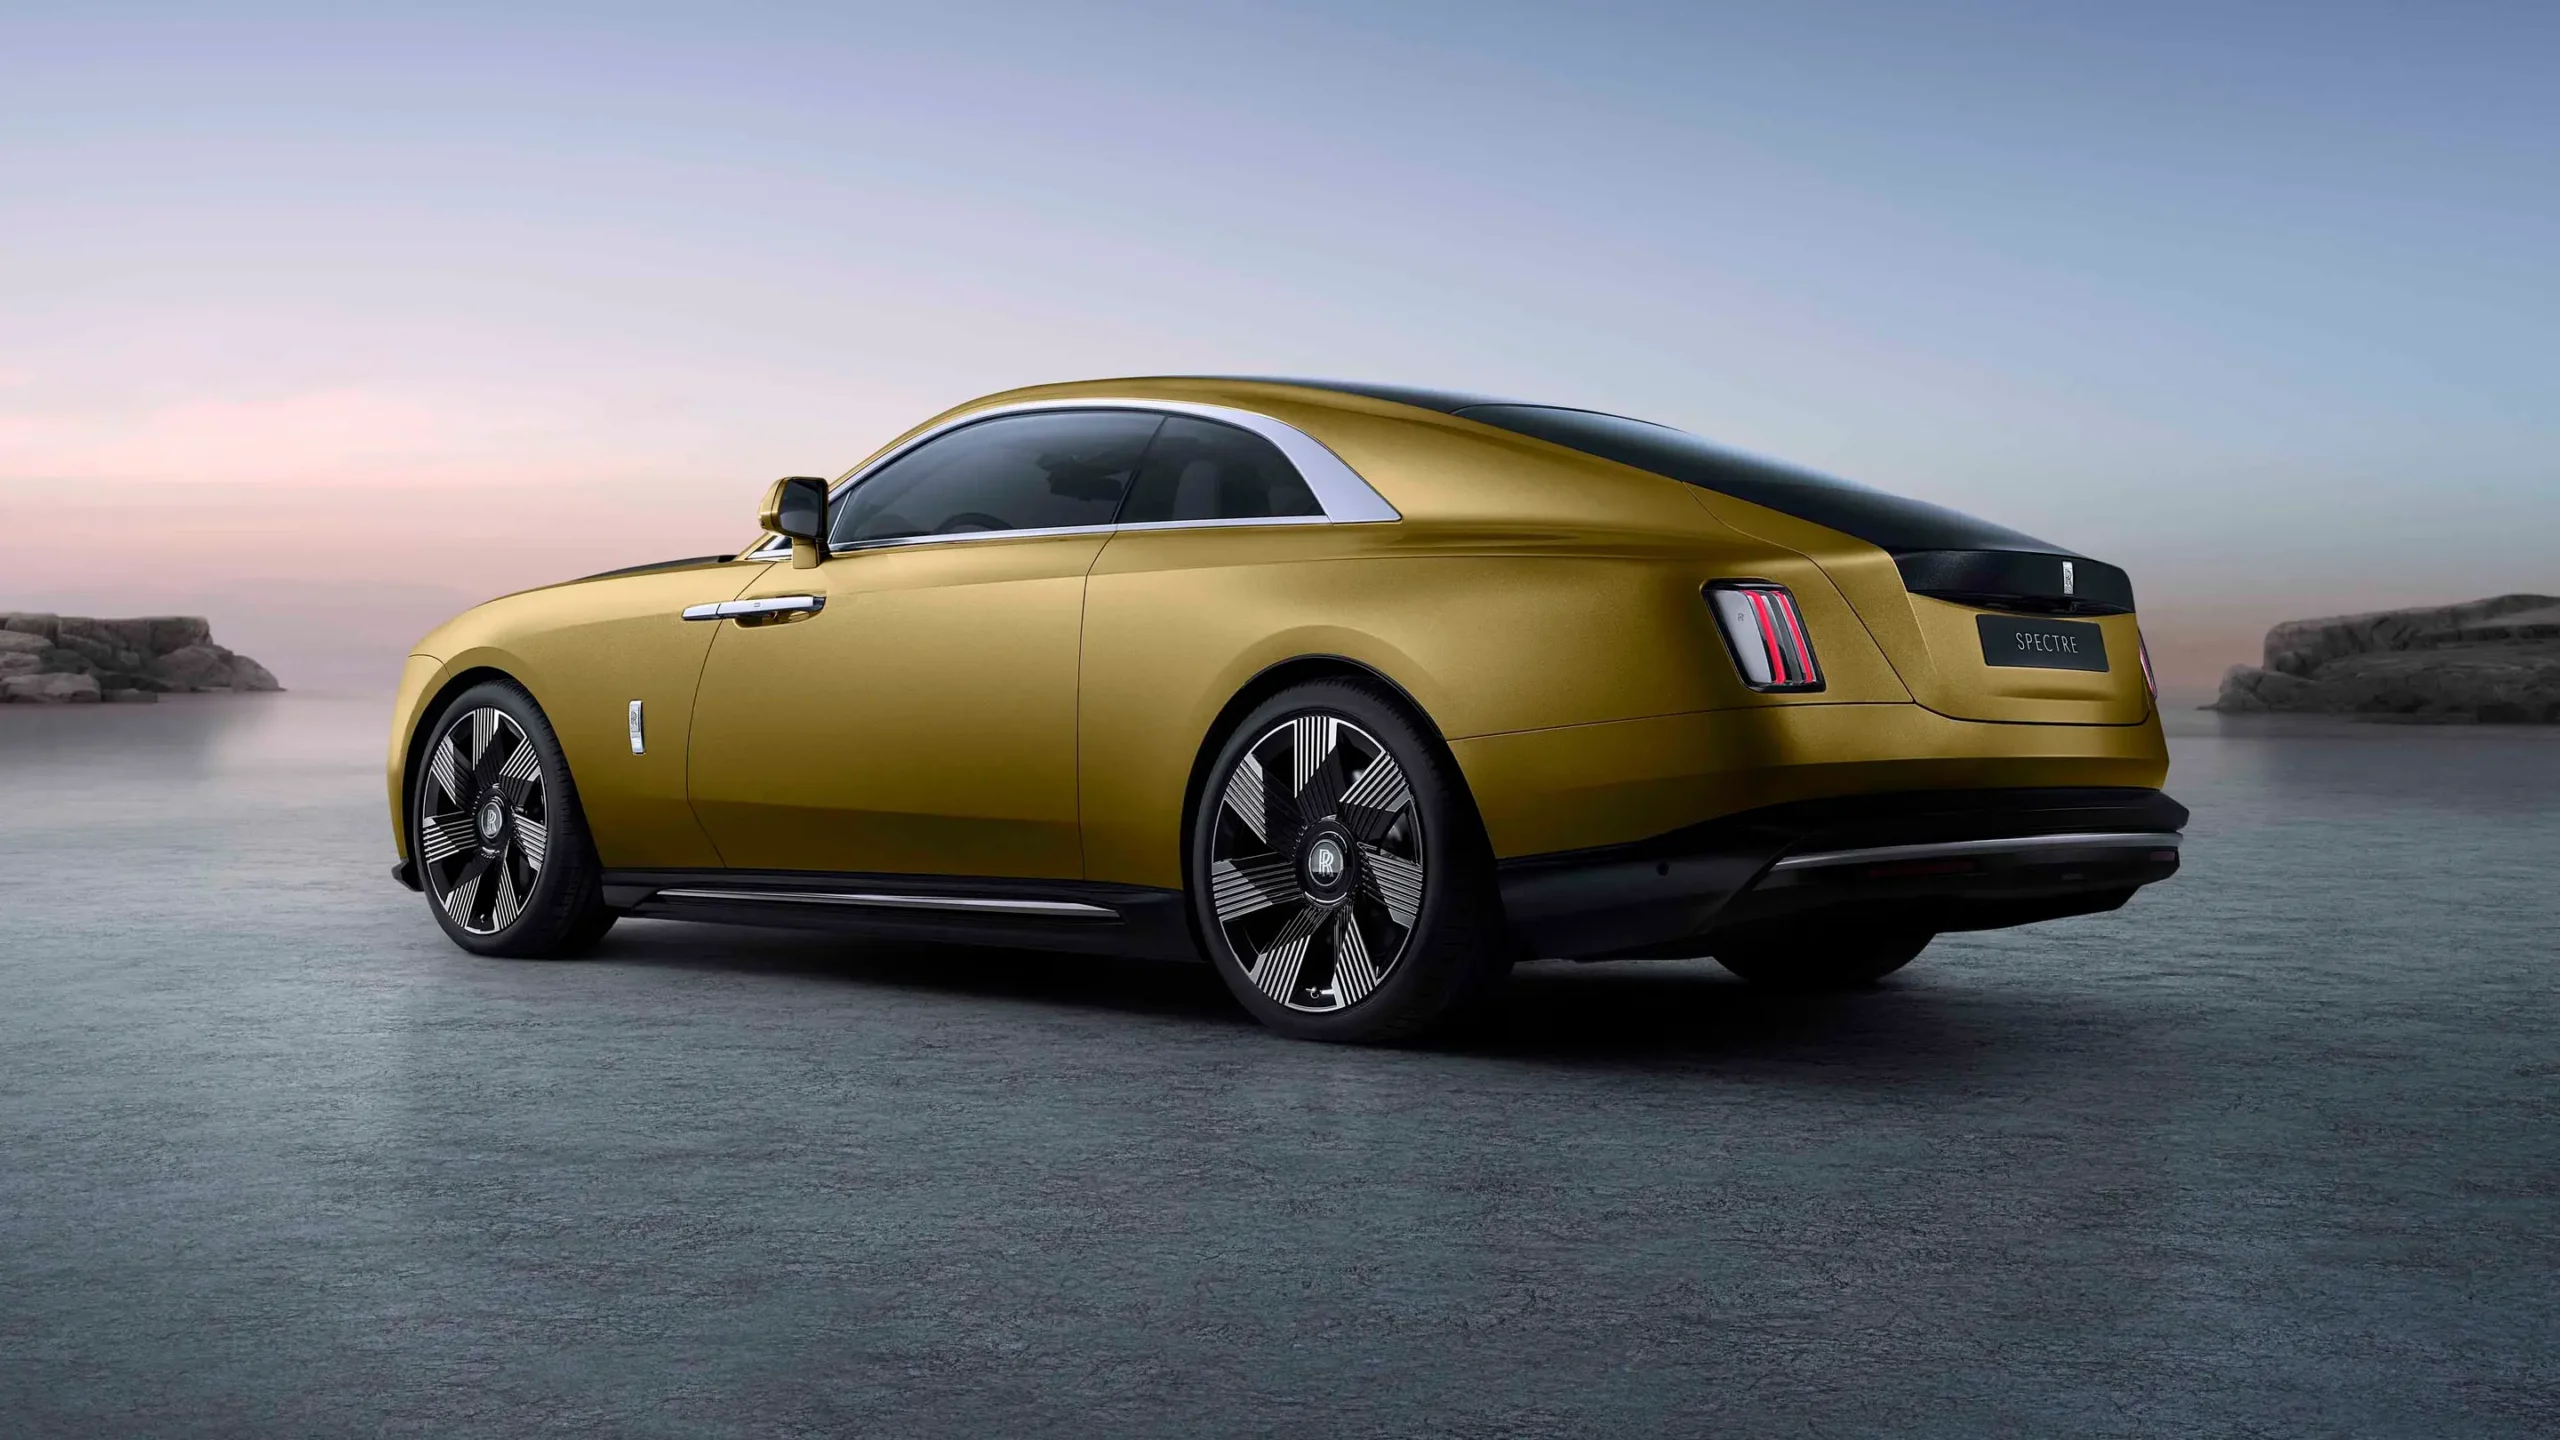 Spectre Rolls-Royce's All-Electric Super Coupé in the Future